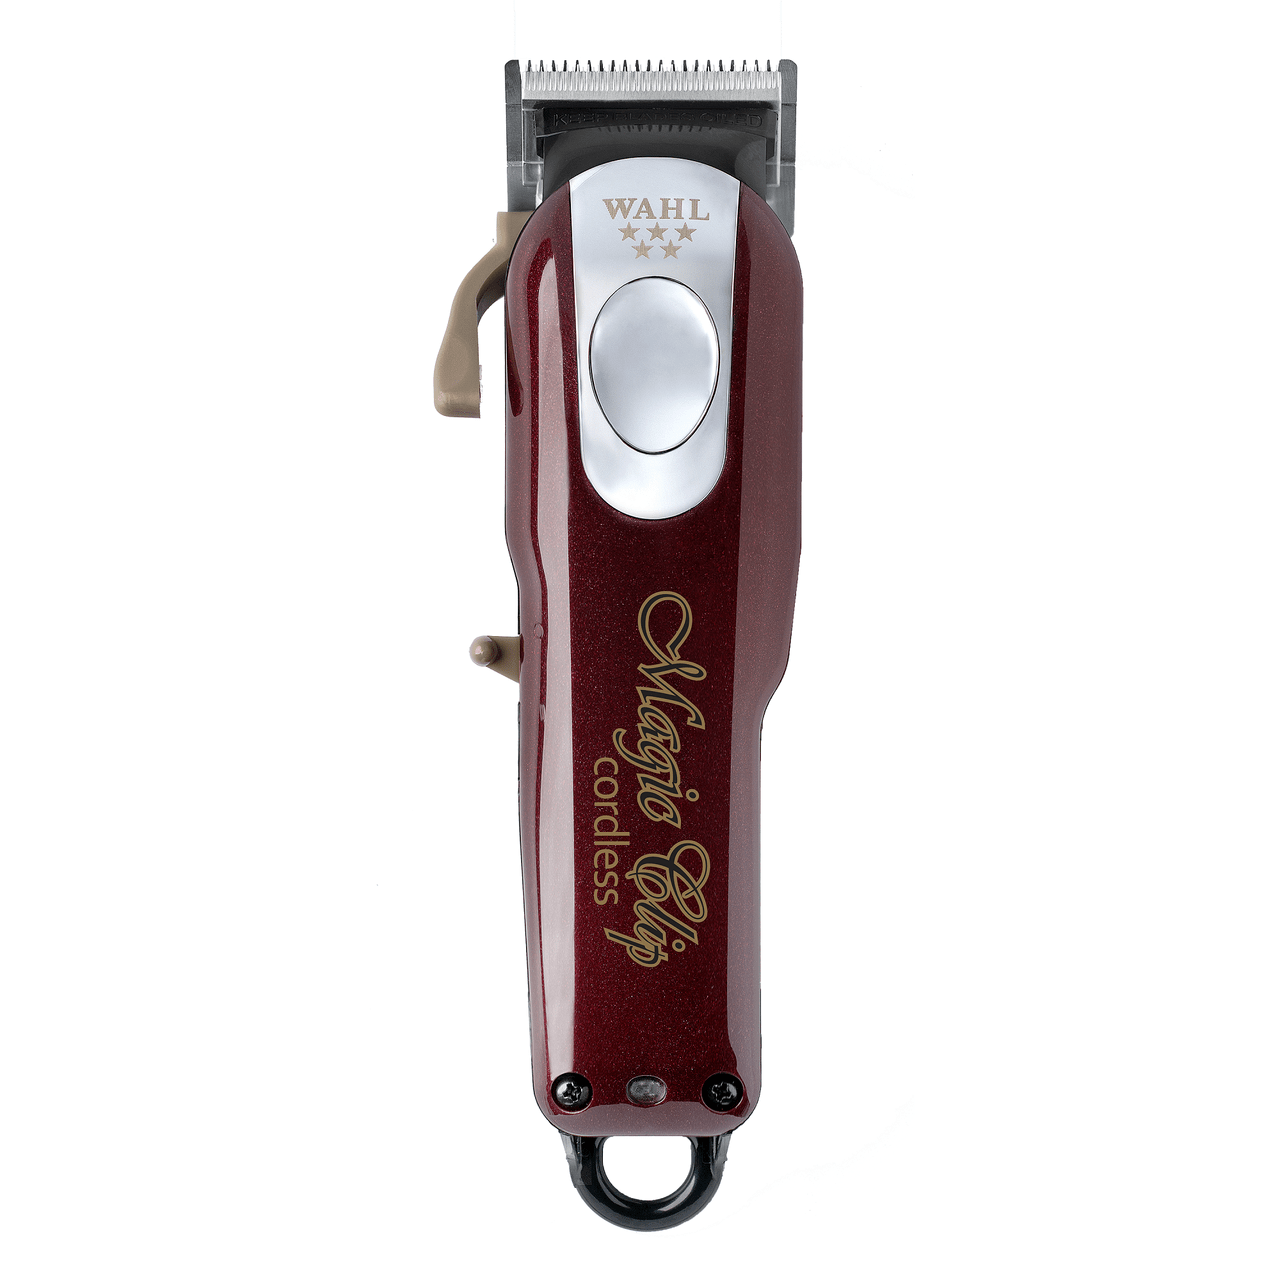 WAHL PROFESSIONAL_Cordless Magic Clip_Cosmetic World